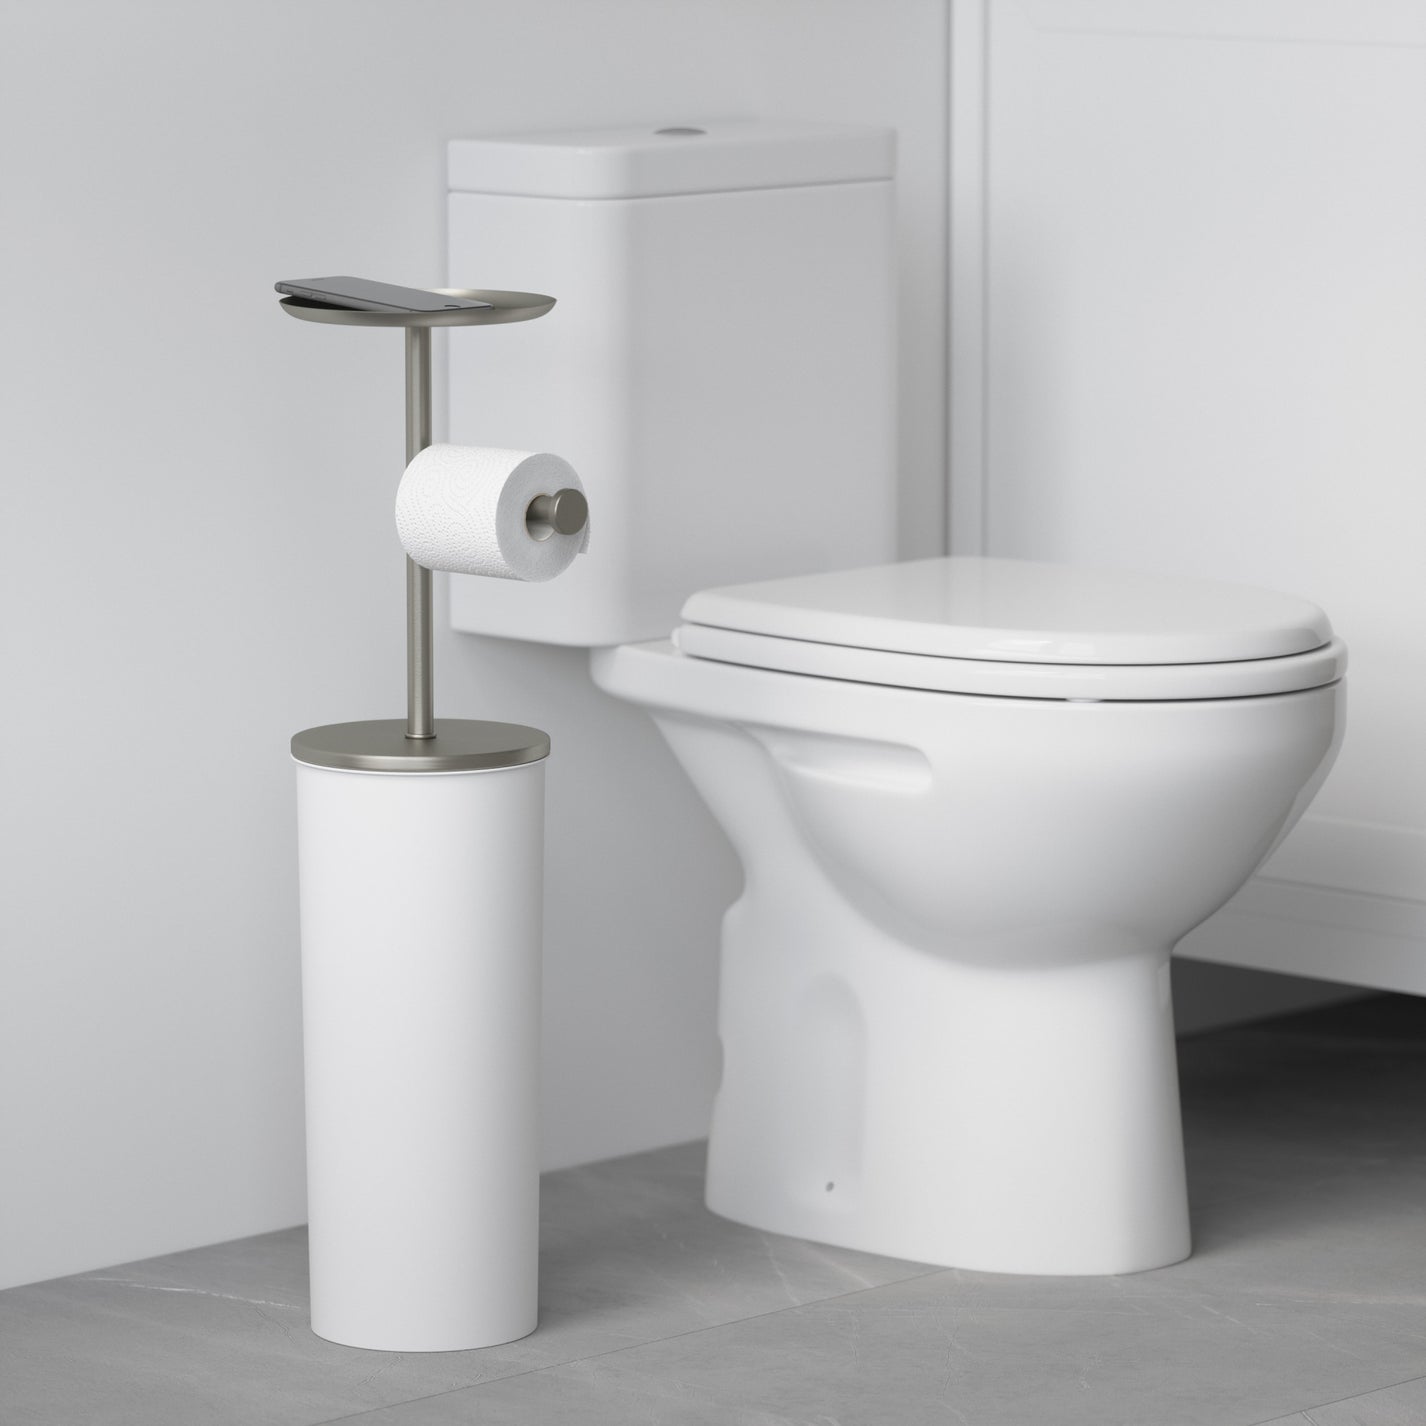 Portaloo Toilet Paper Stand and Storage